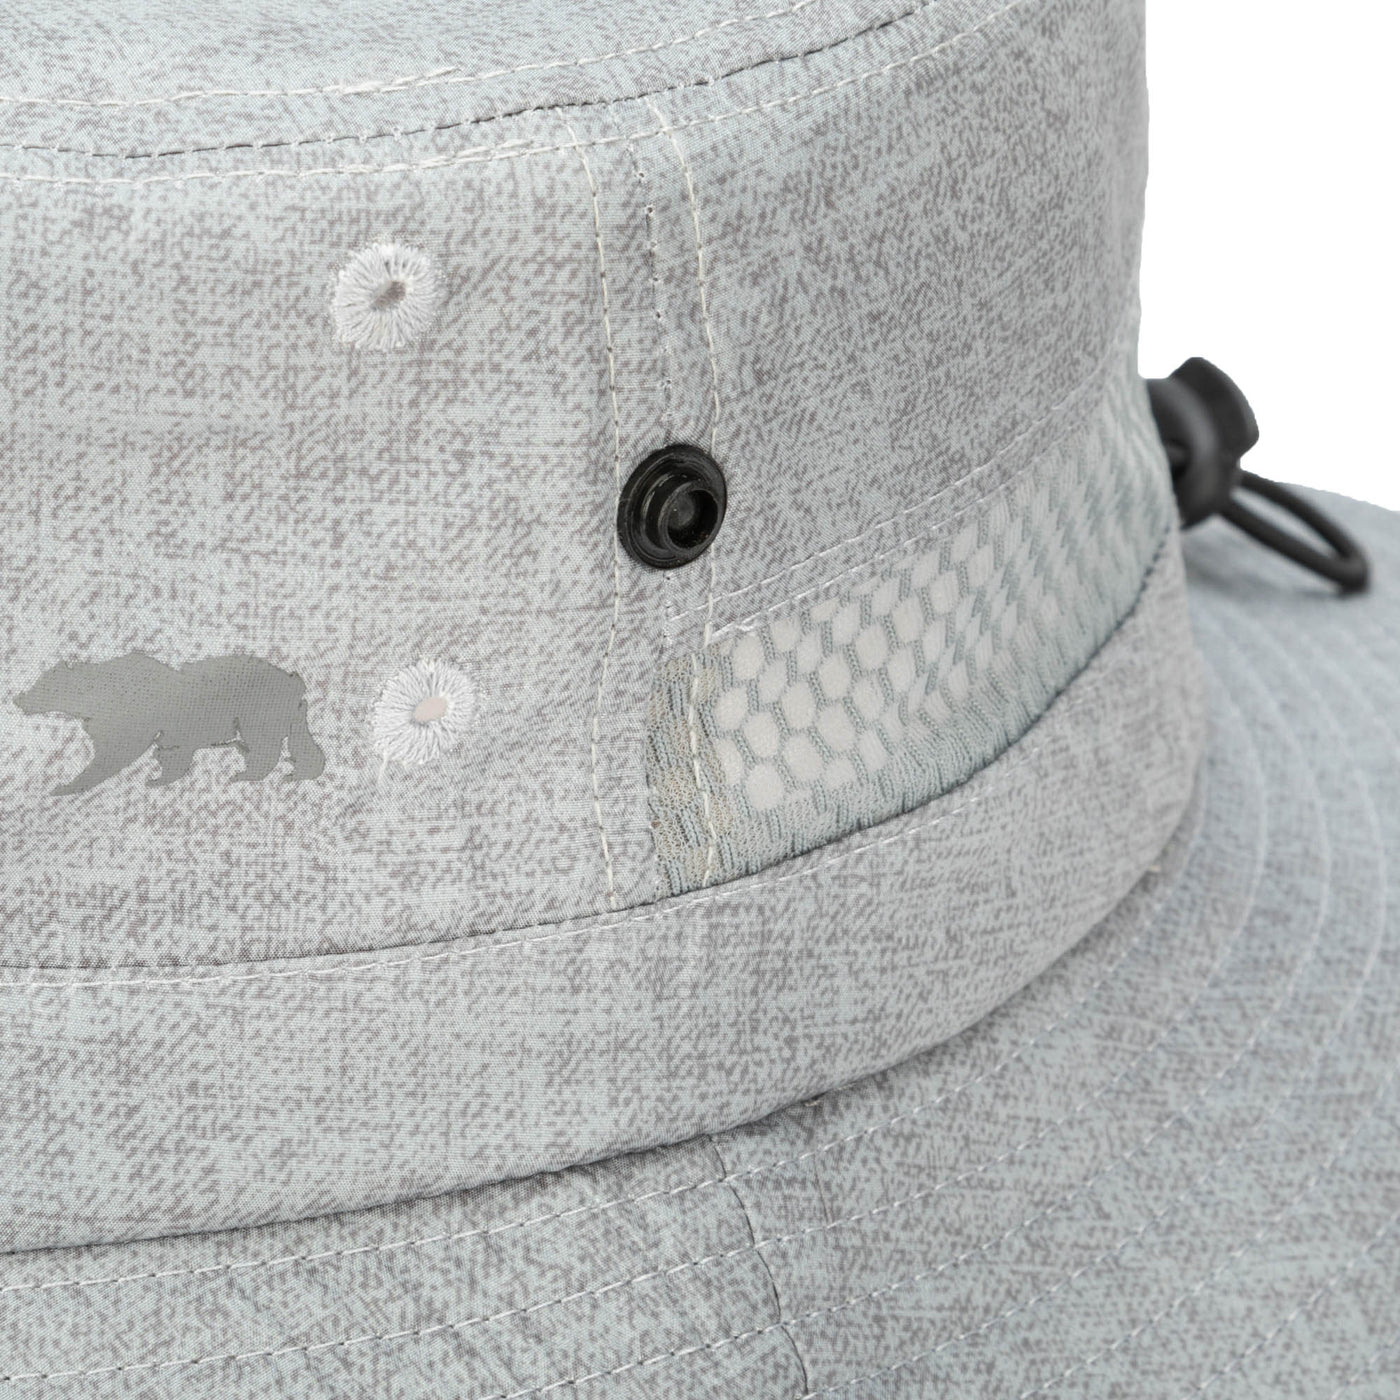 Schnäppchenjäger Outdoor Boonie Hat – and Adjustable Neck Diego Hat Company Flap with San Cord Chin